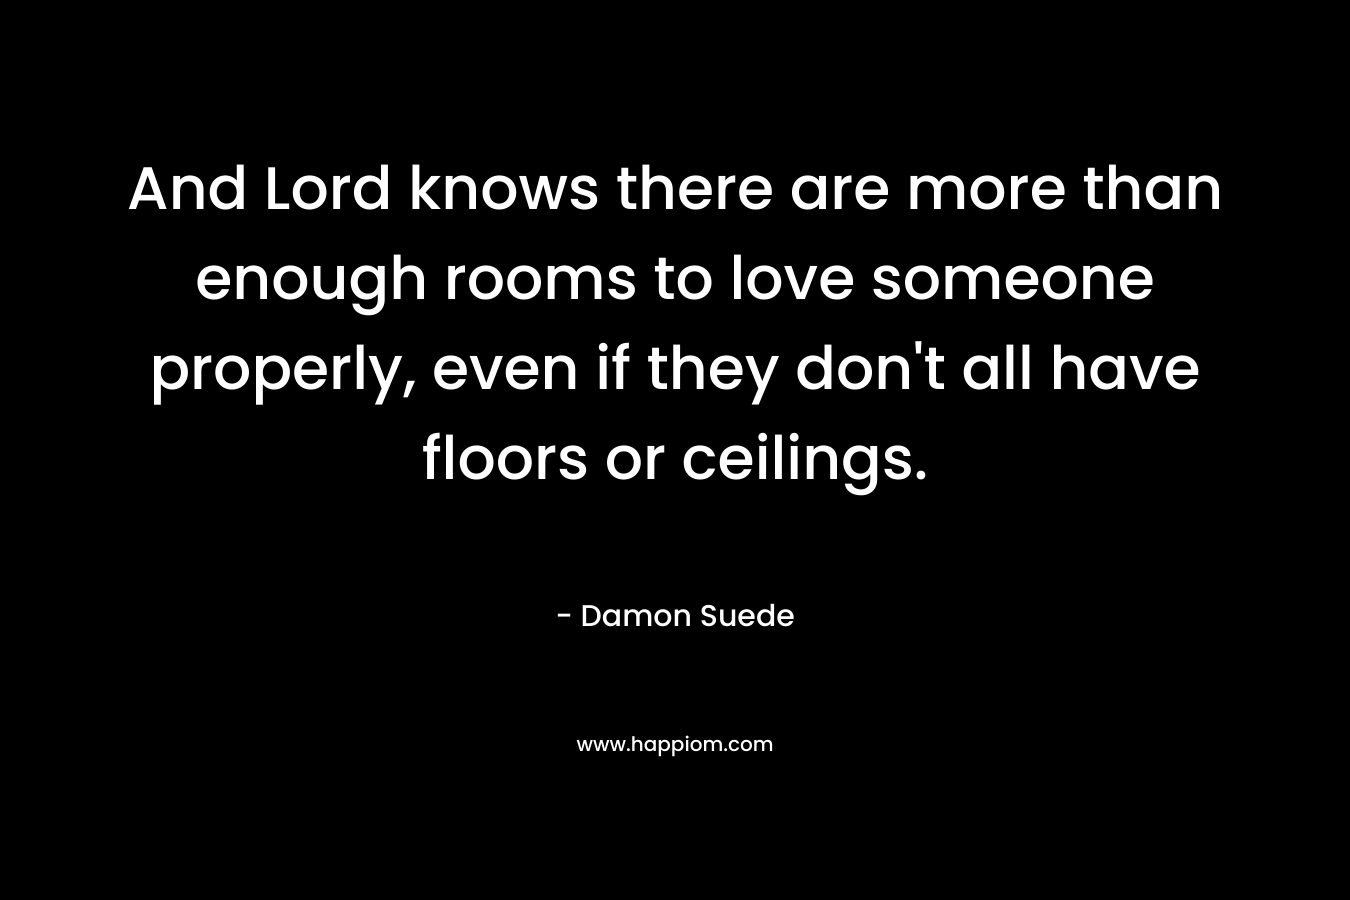 And Lord knows there are more than enough rooms to love someone properly, even if they don't all have floors or ceilings.